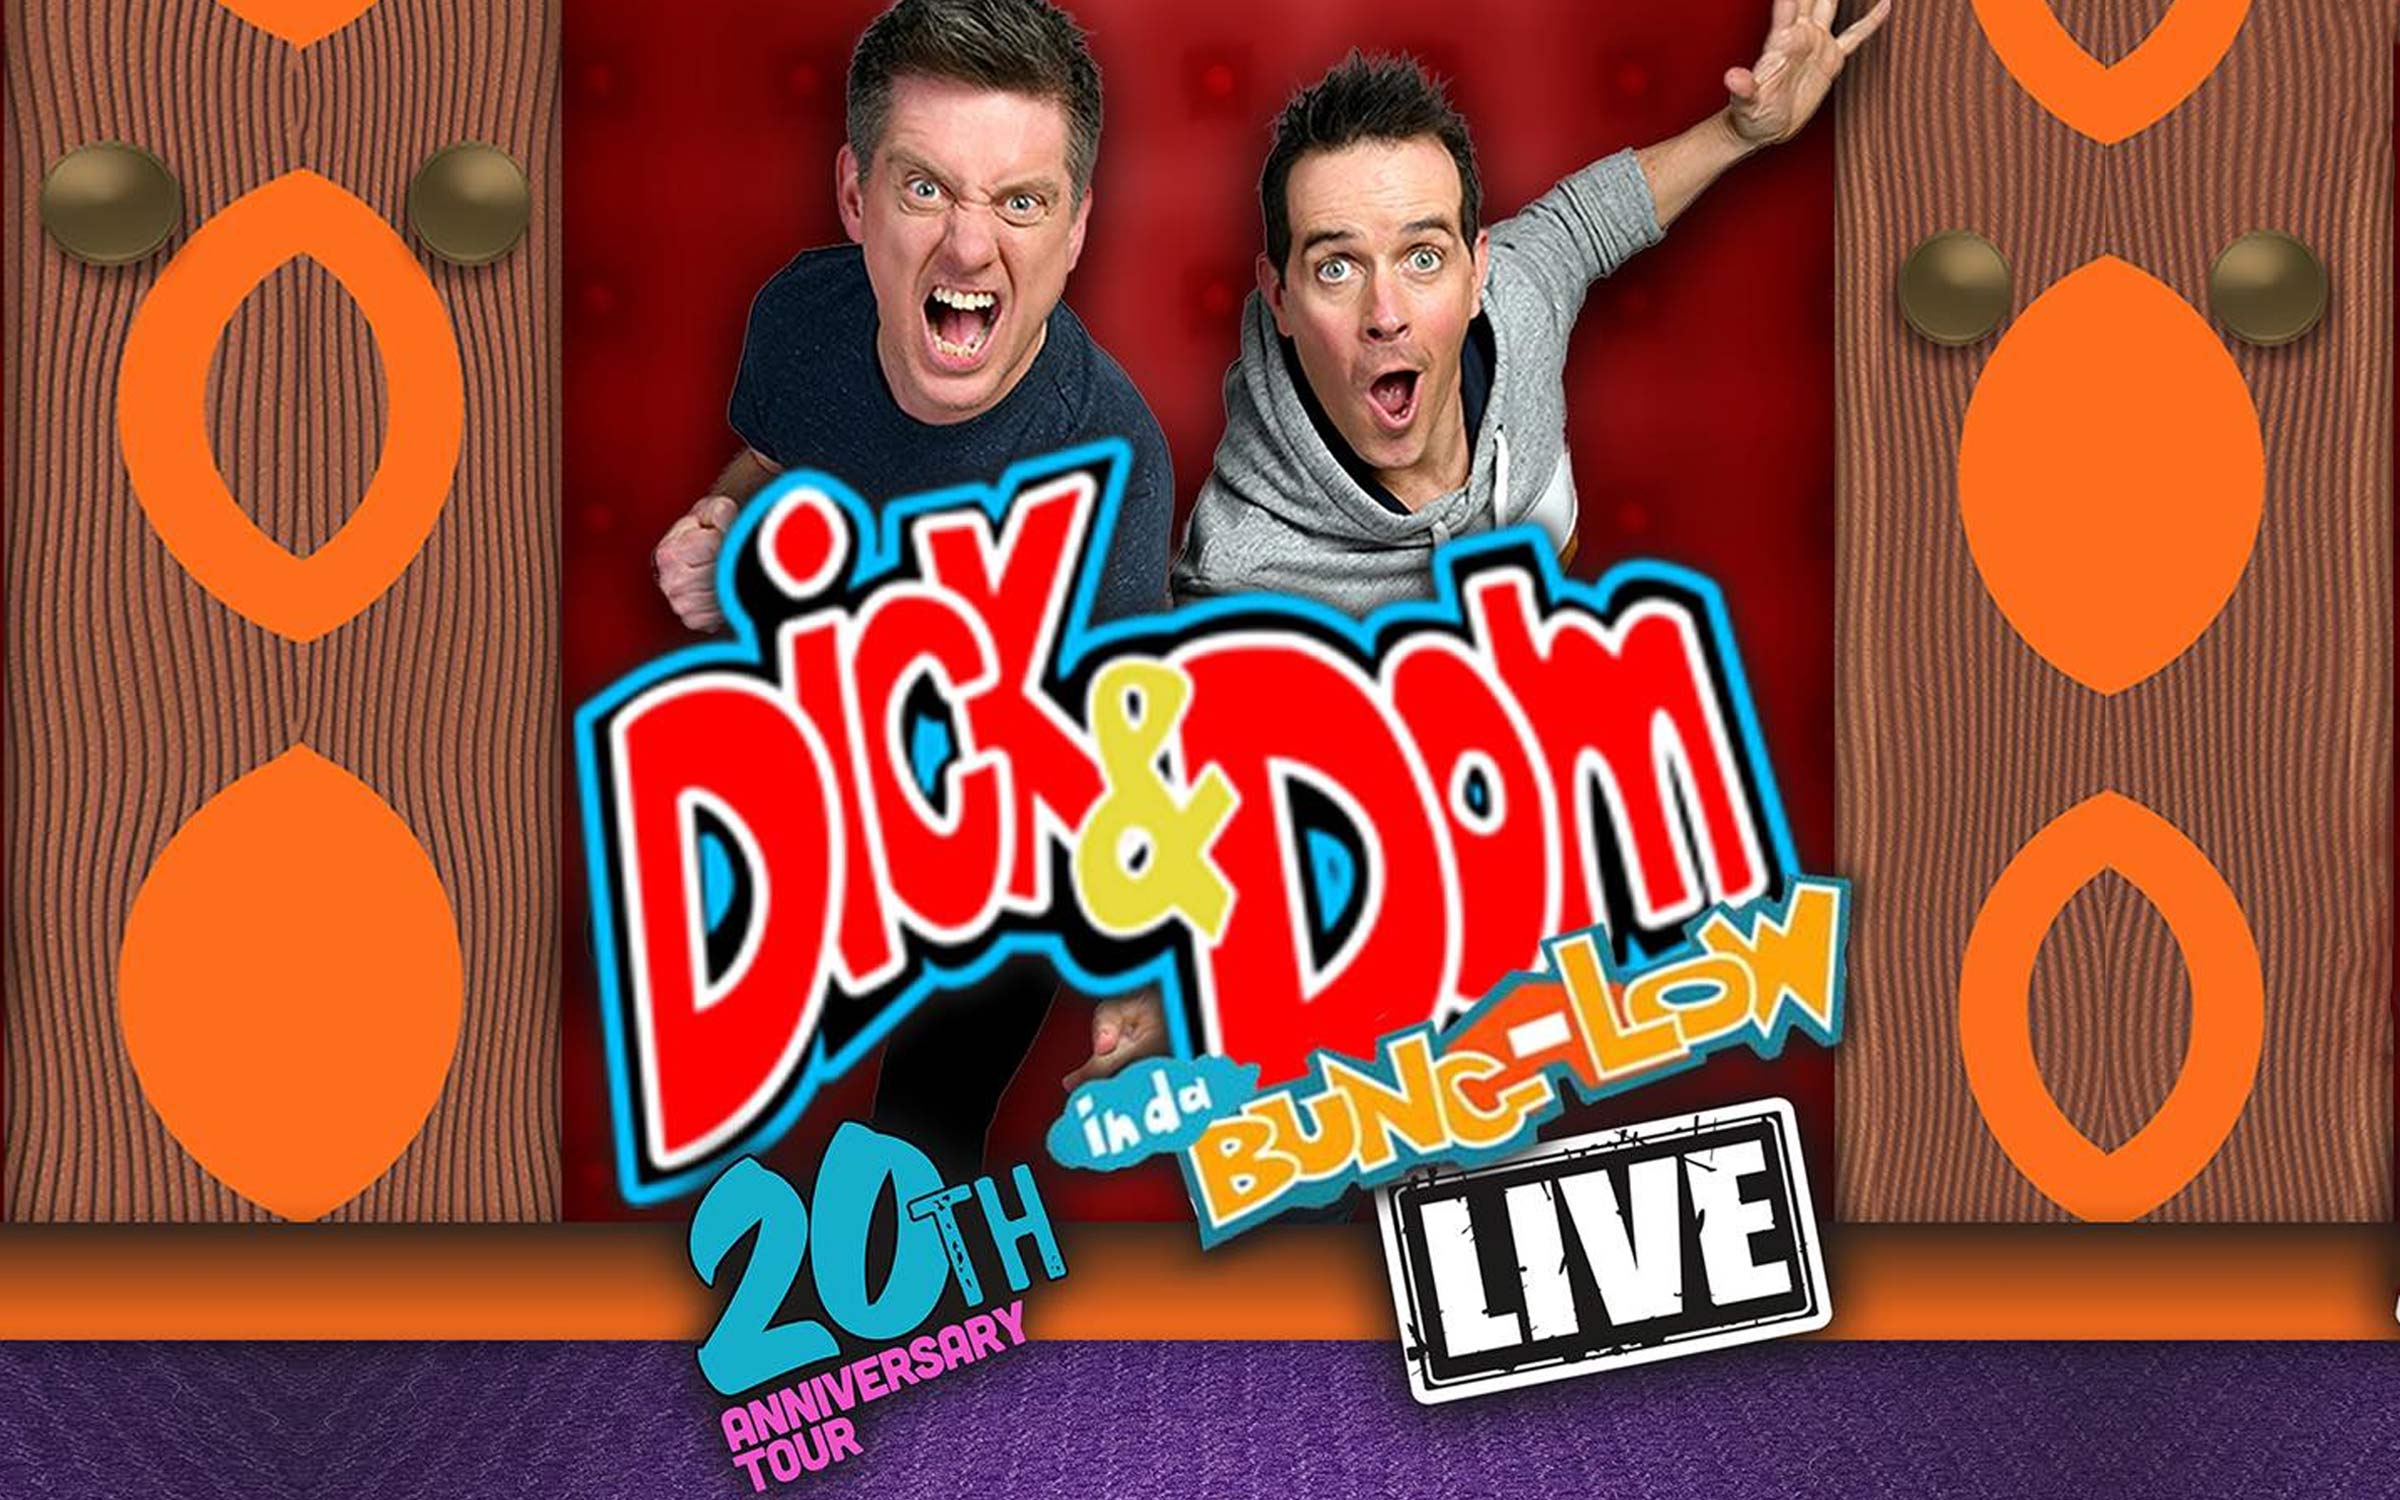 Dick and Dom in da Bungalow Live